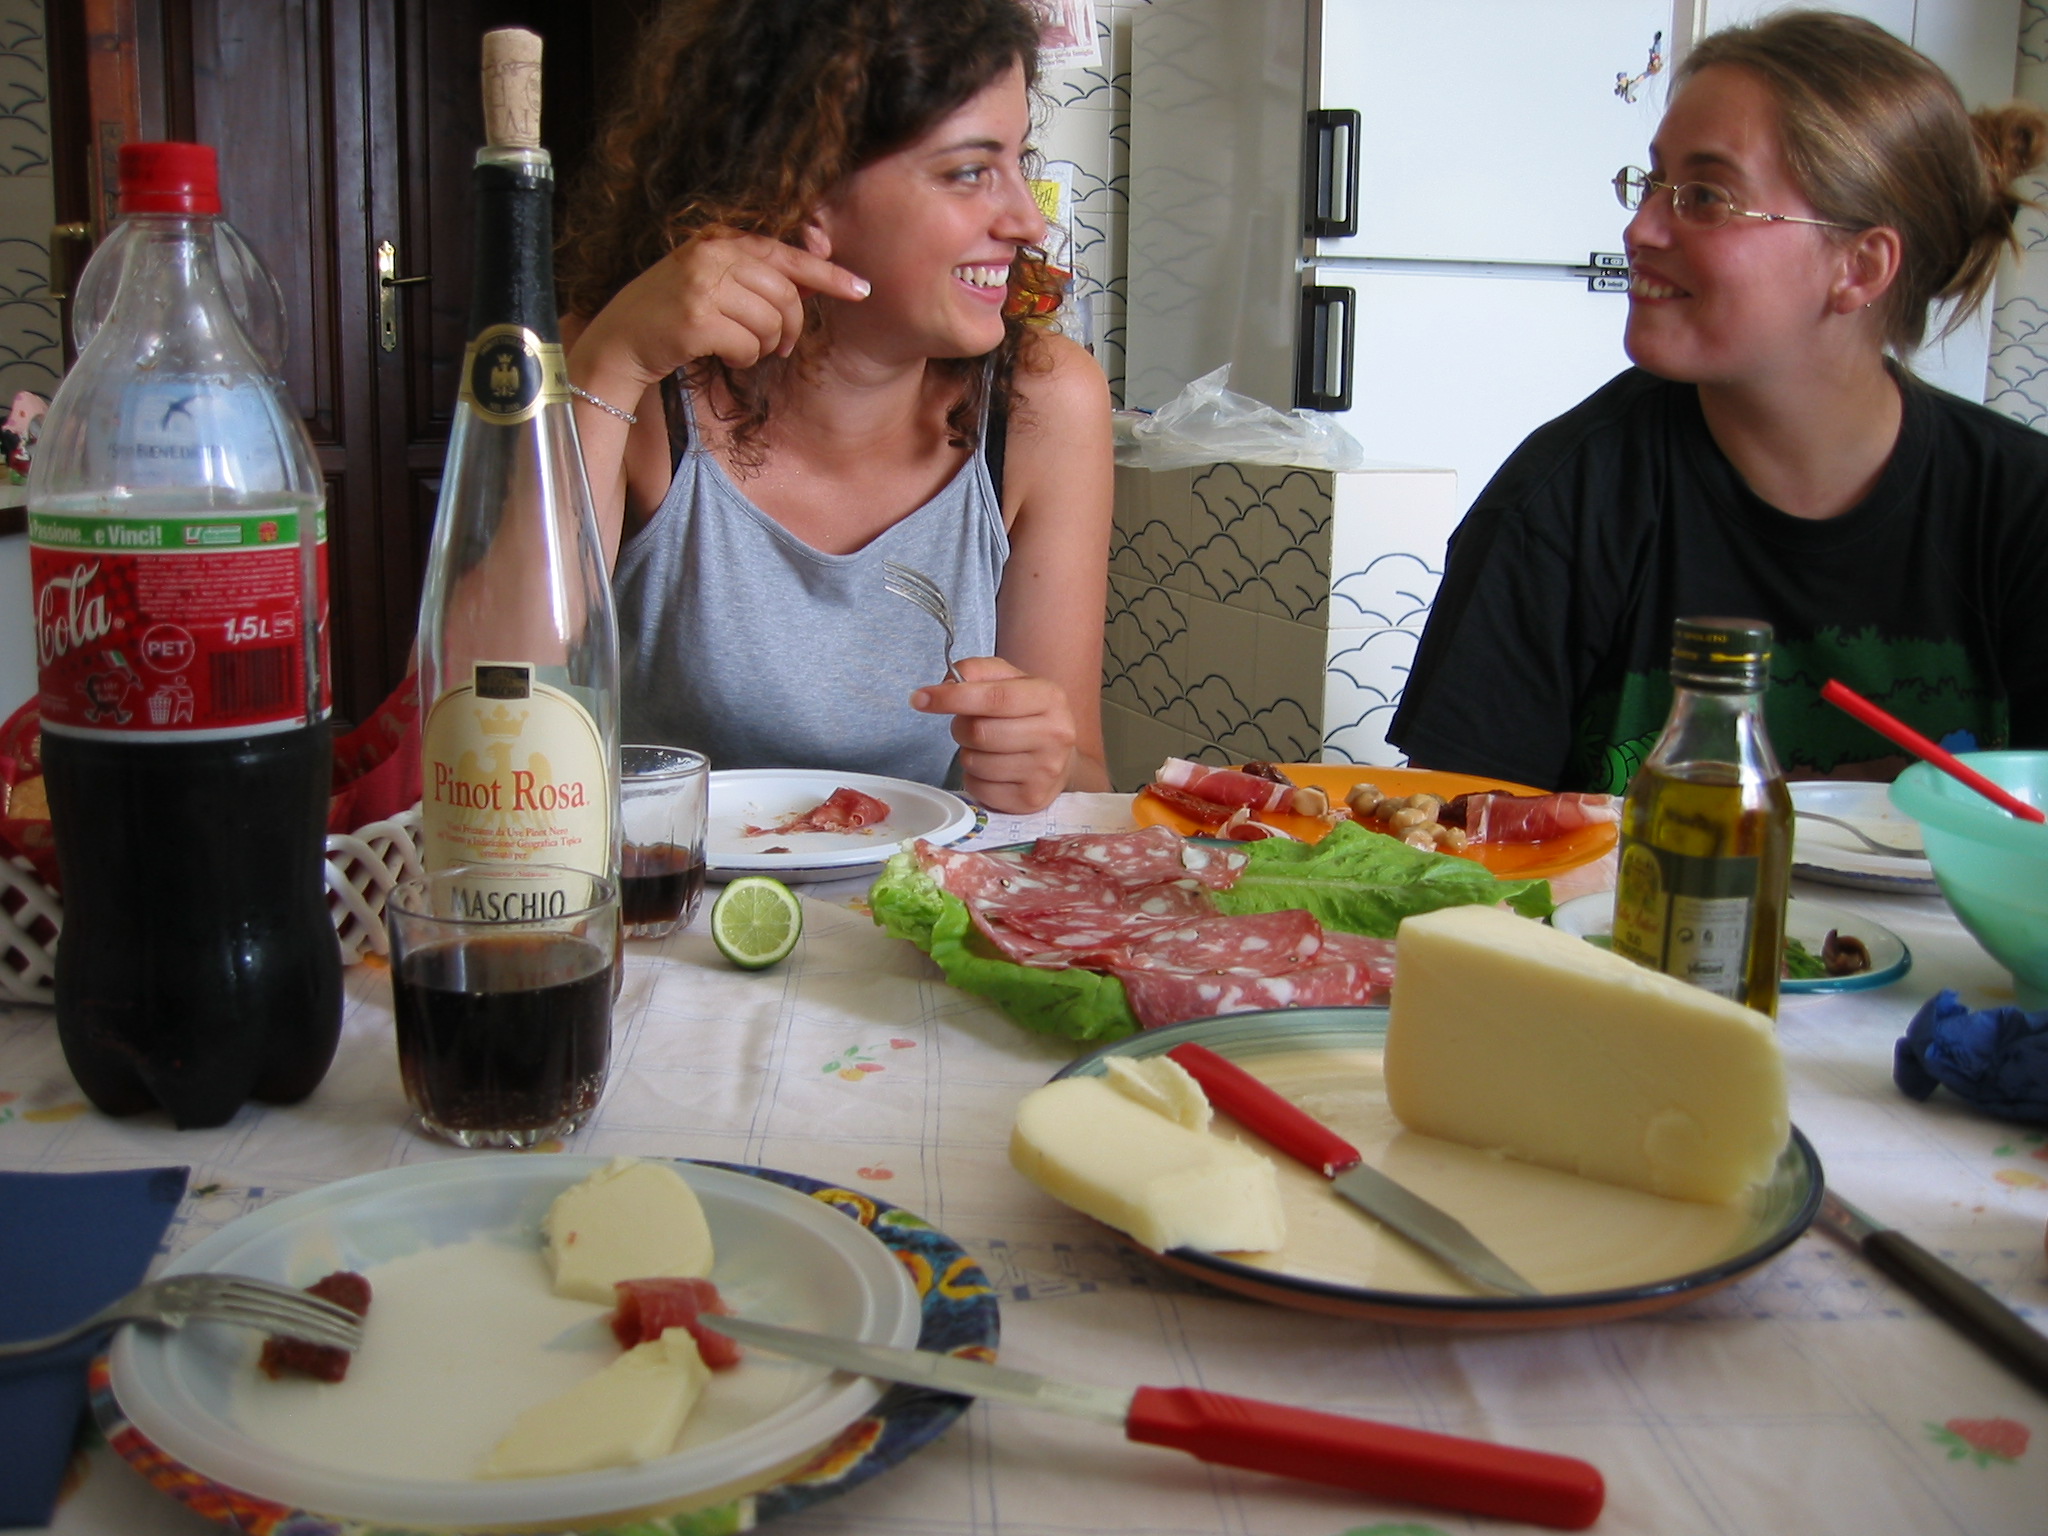 Time for food. Letizia has brought good things from Sicily. Some goat cheese, some bovine.